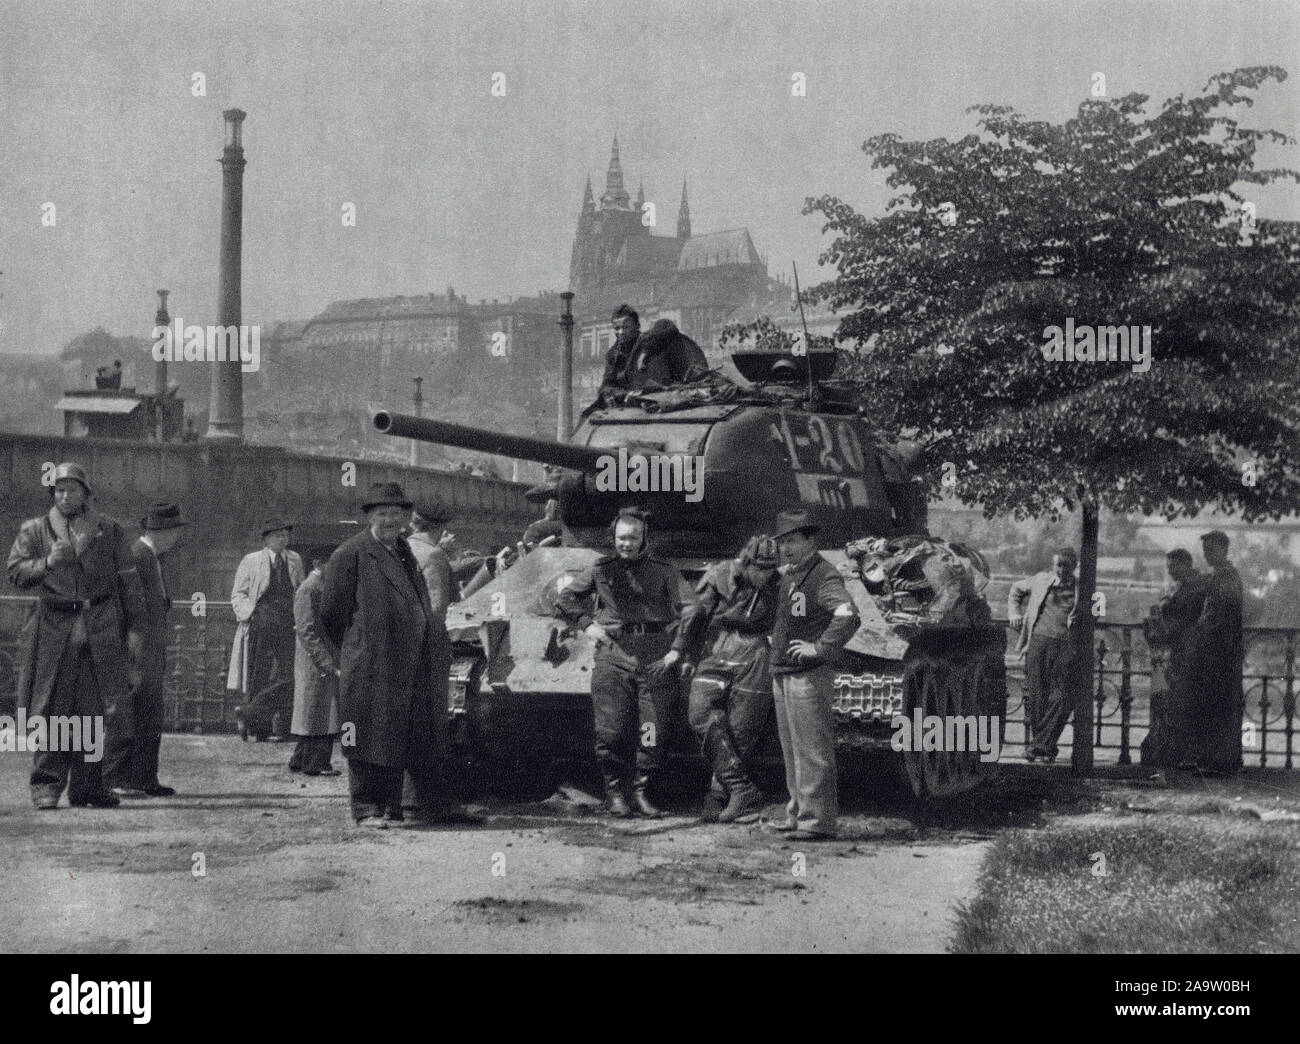 Red Army tank T-34 on the embankment of the Vltava River next to the Mánes Bridge (Mánesův most) in Prague, Czechoslovakia, in May 1945. Black and white photograph by Czech photographer Oldřich Smola taken probably on 9 May 1945 and published in the Czechoslovak book 'The Heart of Prague on Fire' ('Srdce Prahy v plamenech') issued in 1946. Courtesy of the Azoor Postcard Collection. Stock Photo